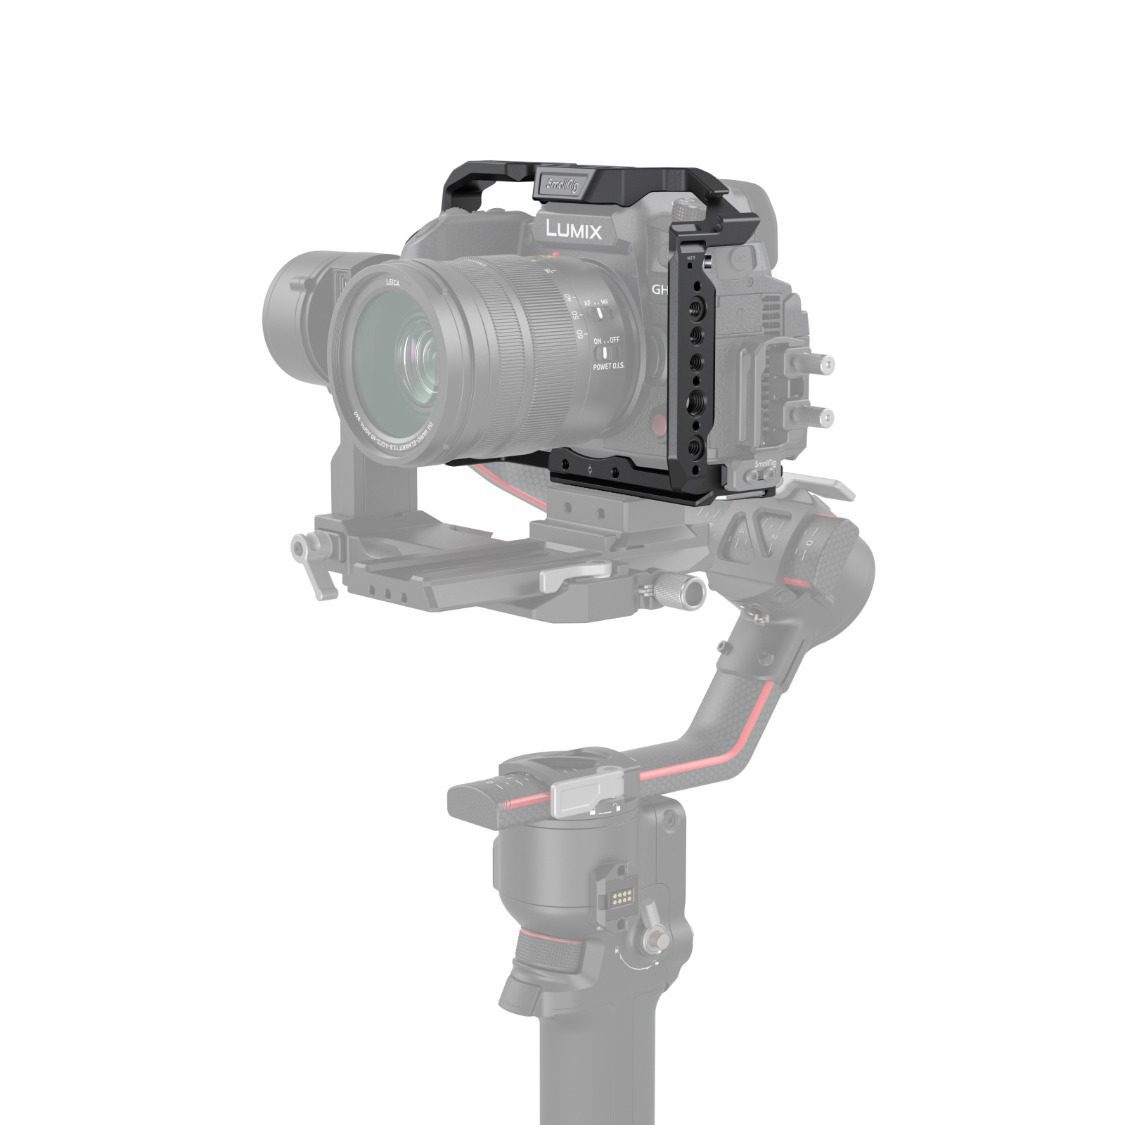 SmallRig Full Cage for Lumix GH6 3784